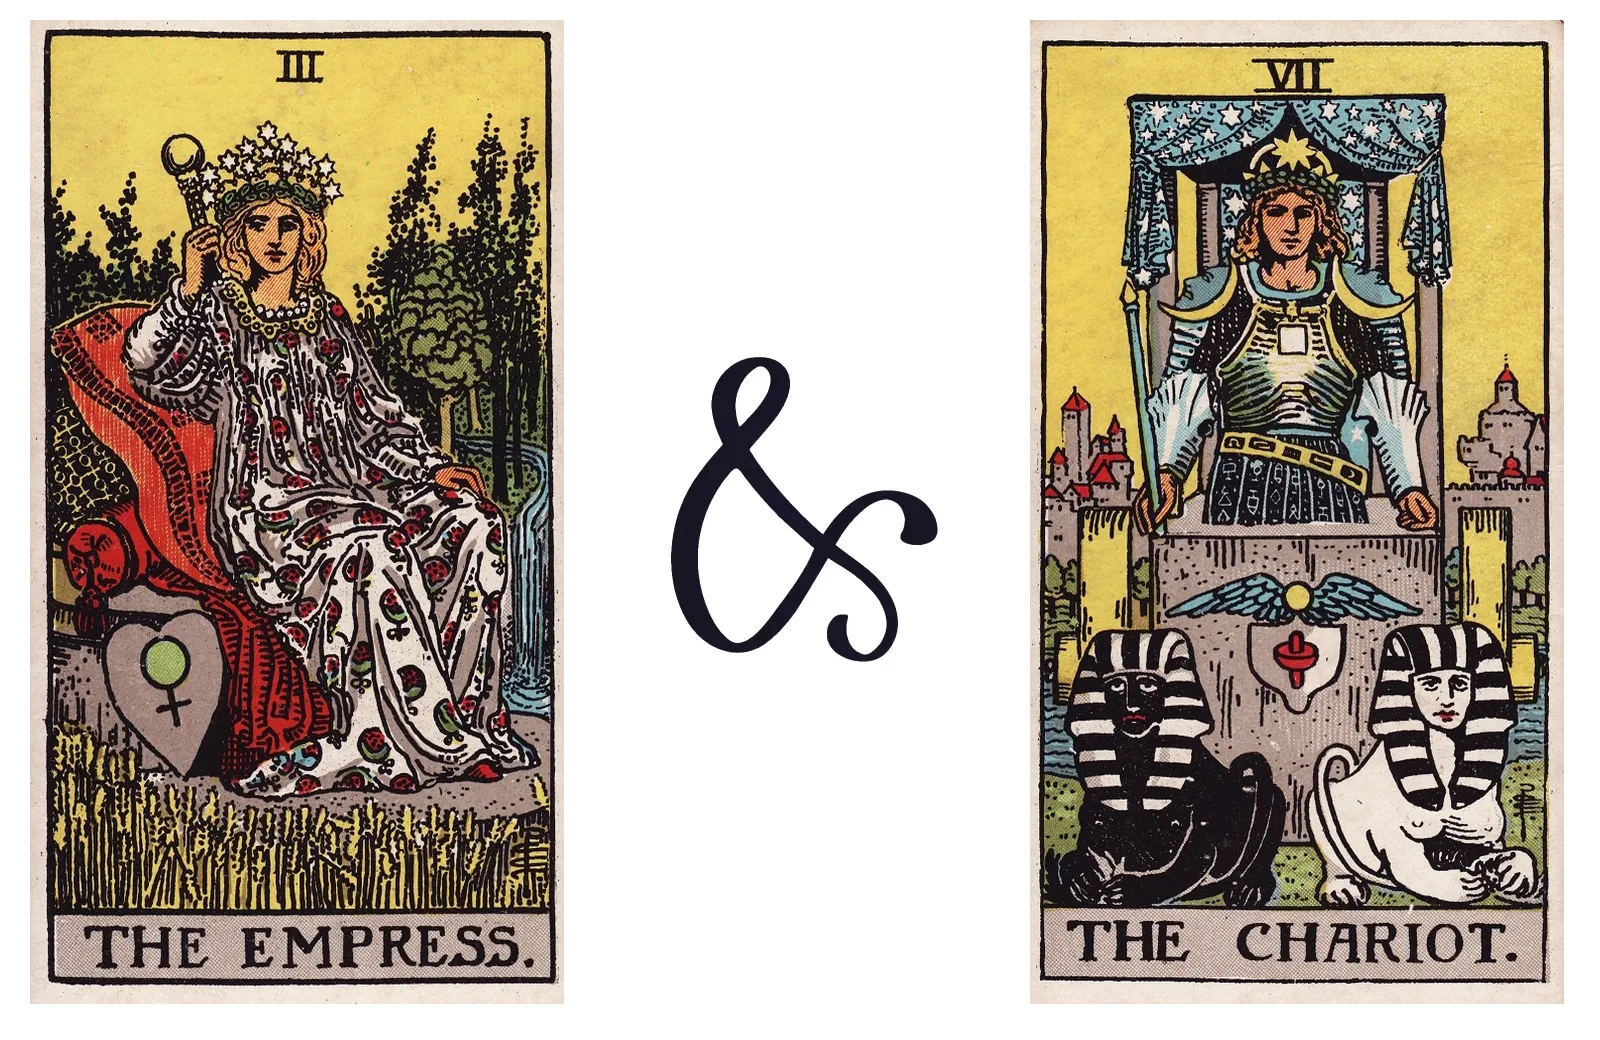 The Empress and The Chariot